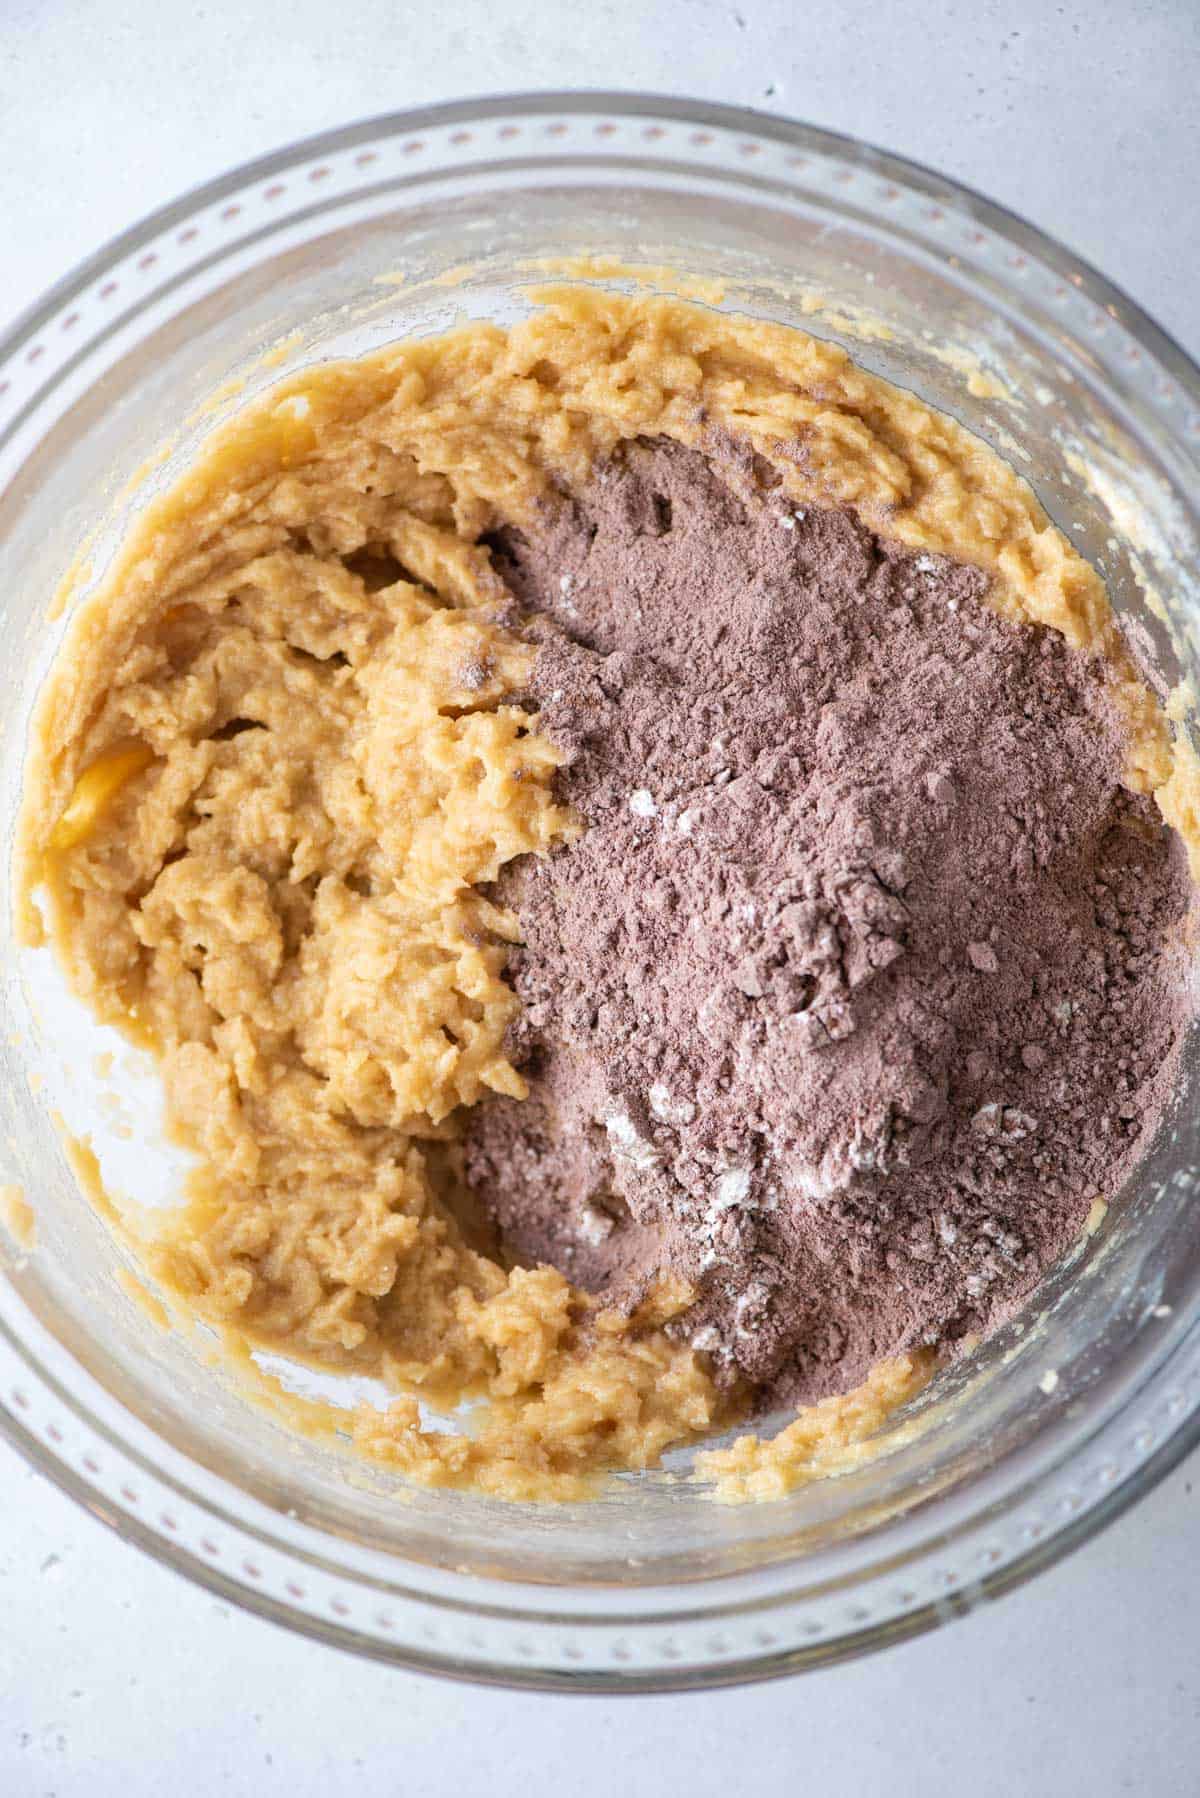 Cocoa powder added to cookie dough